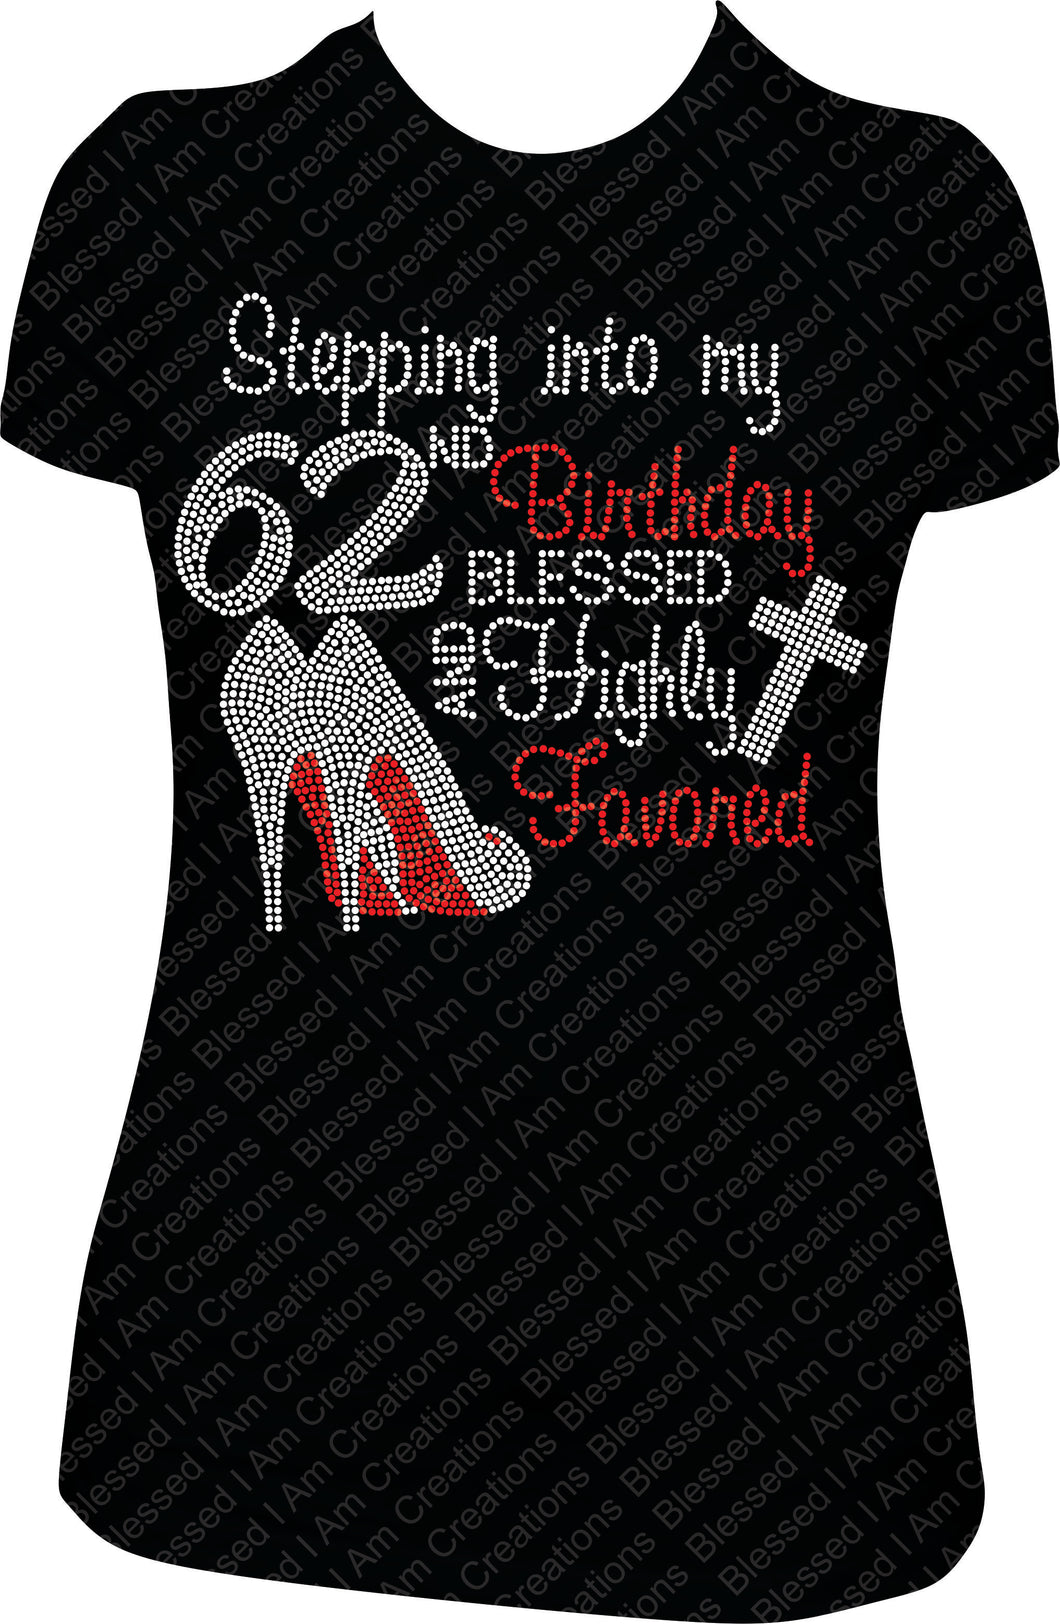 Stepping into my 62nd Birthday Blessed and Highly Favored Rhinestone Birthday Shirt